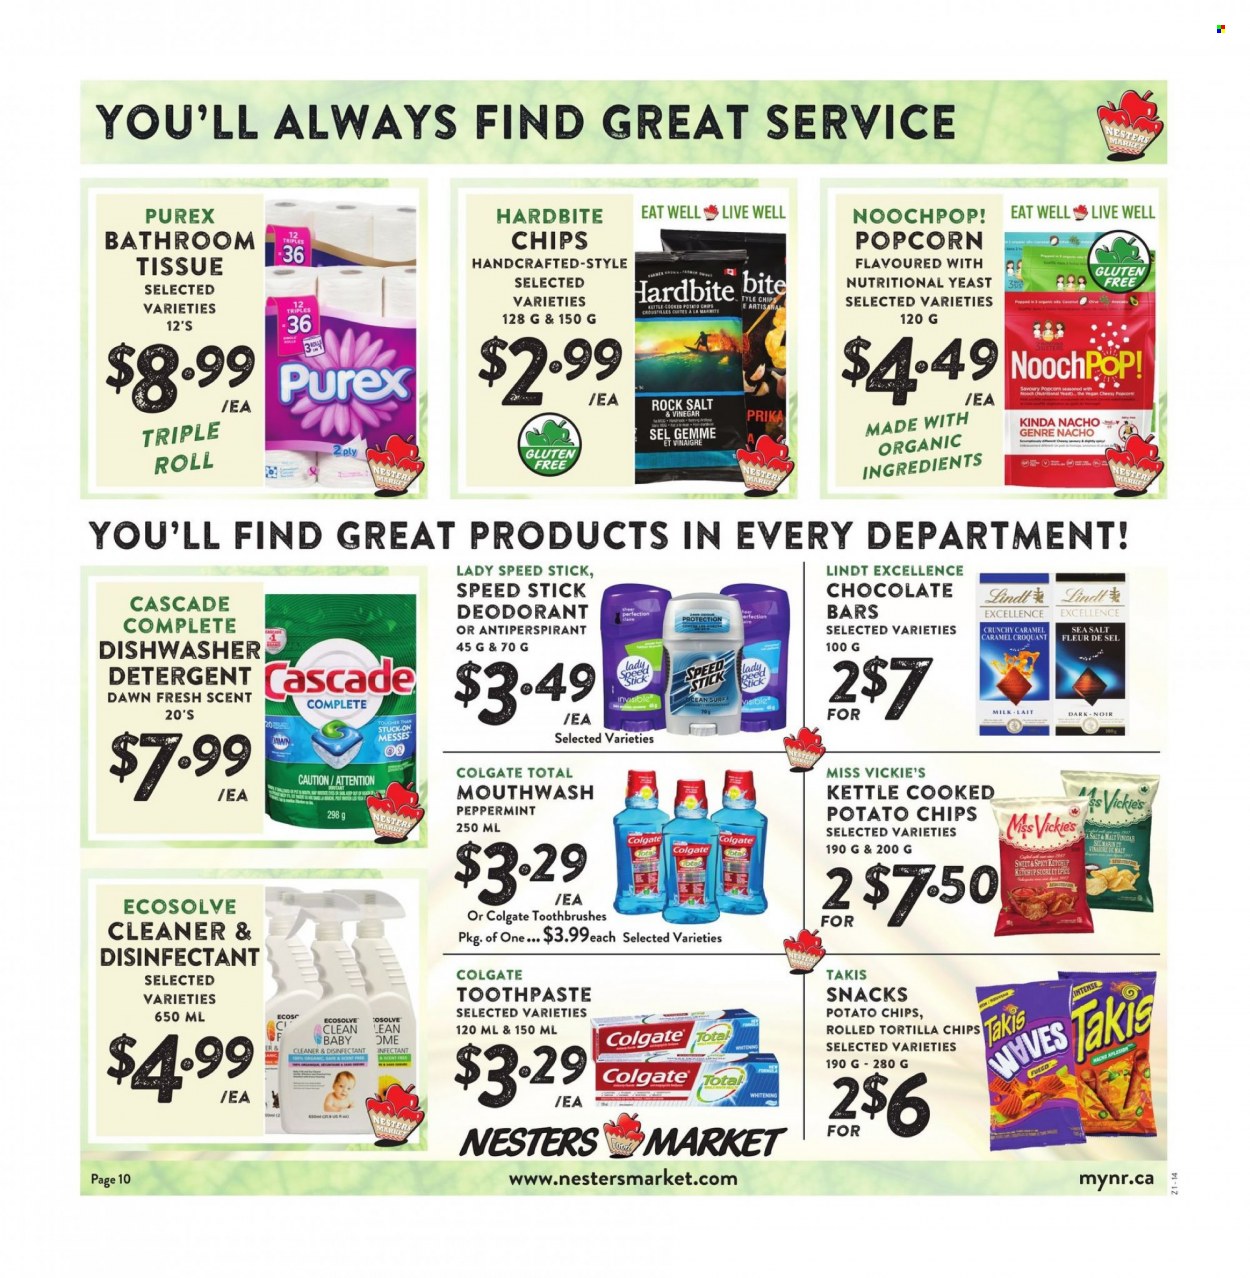 thumbnail - Nesters Food Market Flyer - May 15, 2022 - May 21, 2022 - Sales products - milk, snack, chocolate bar, tortilla chips, potato chips, chips, popcorn, malt, caramel, tissues, cleaner, Cascade, Purex, toothpaste, mouthwash, anti-perspirant, Speed Stick, Sure, detergent, Colgate, ketchup, Lindt, desinfection, deodorant. Page 10.